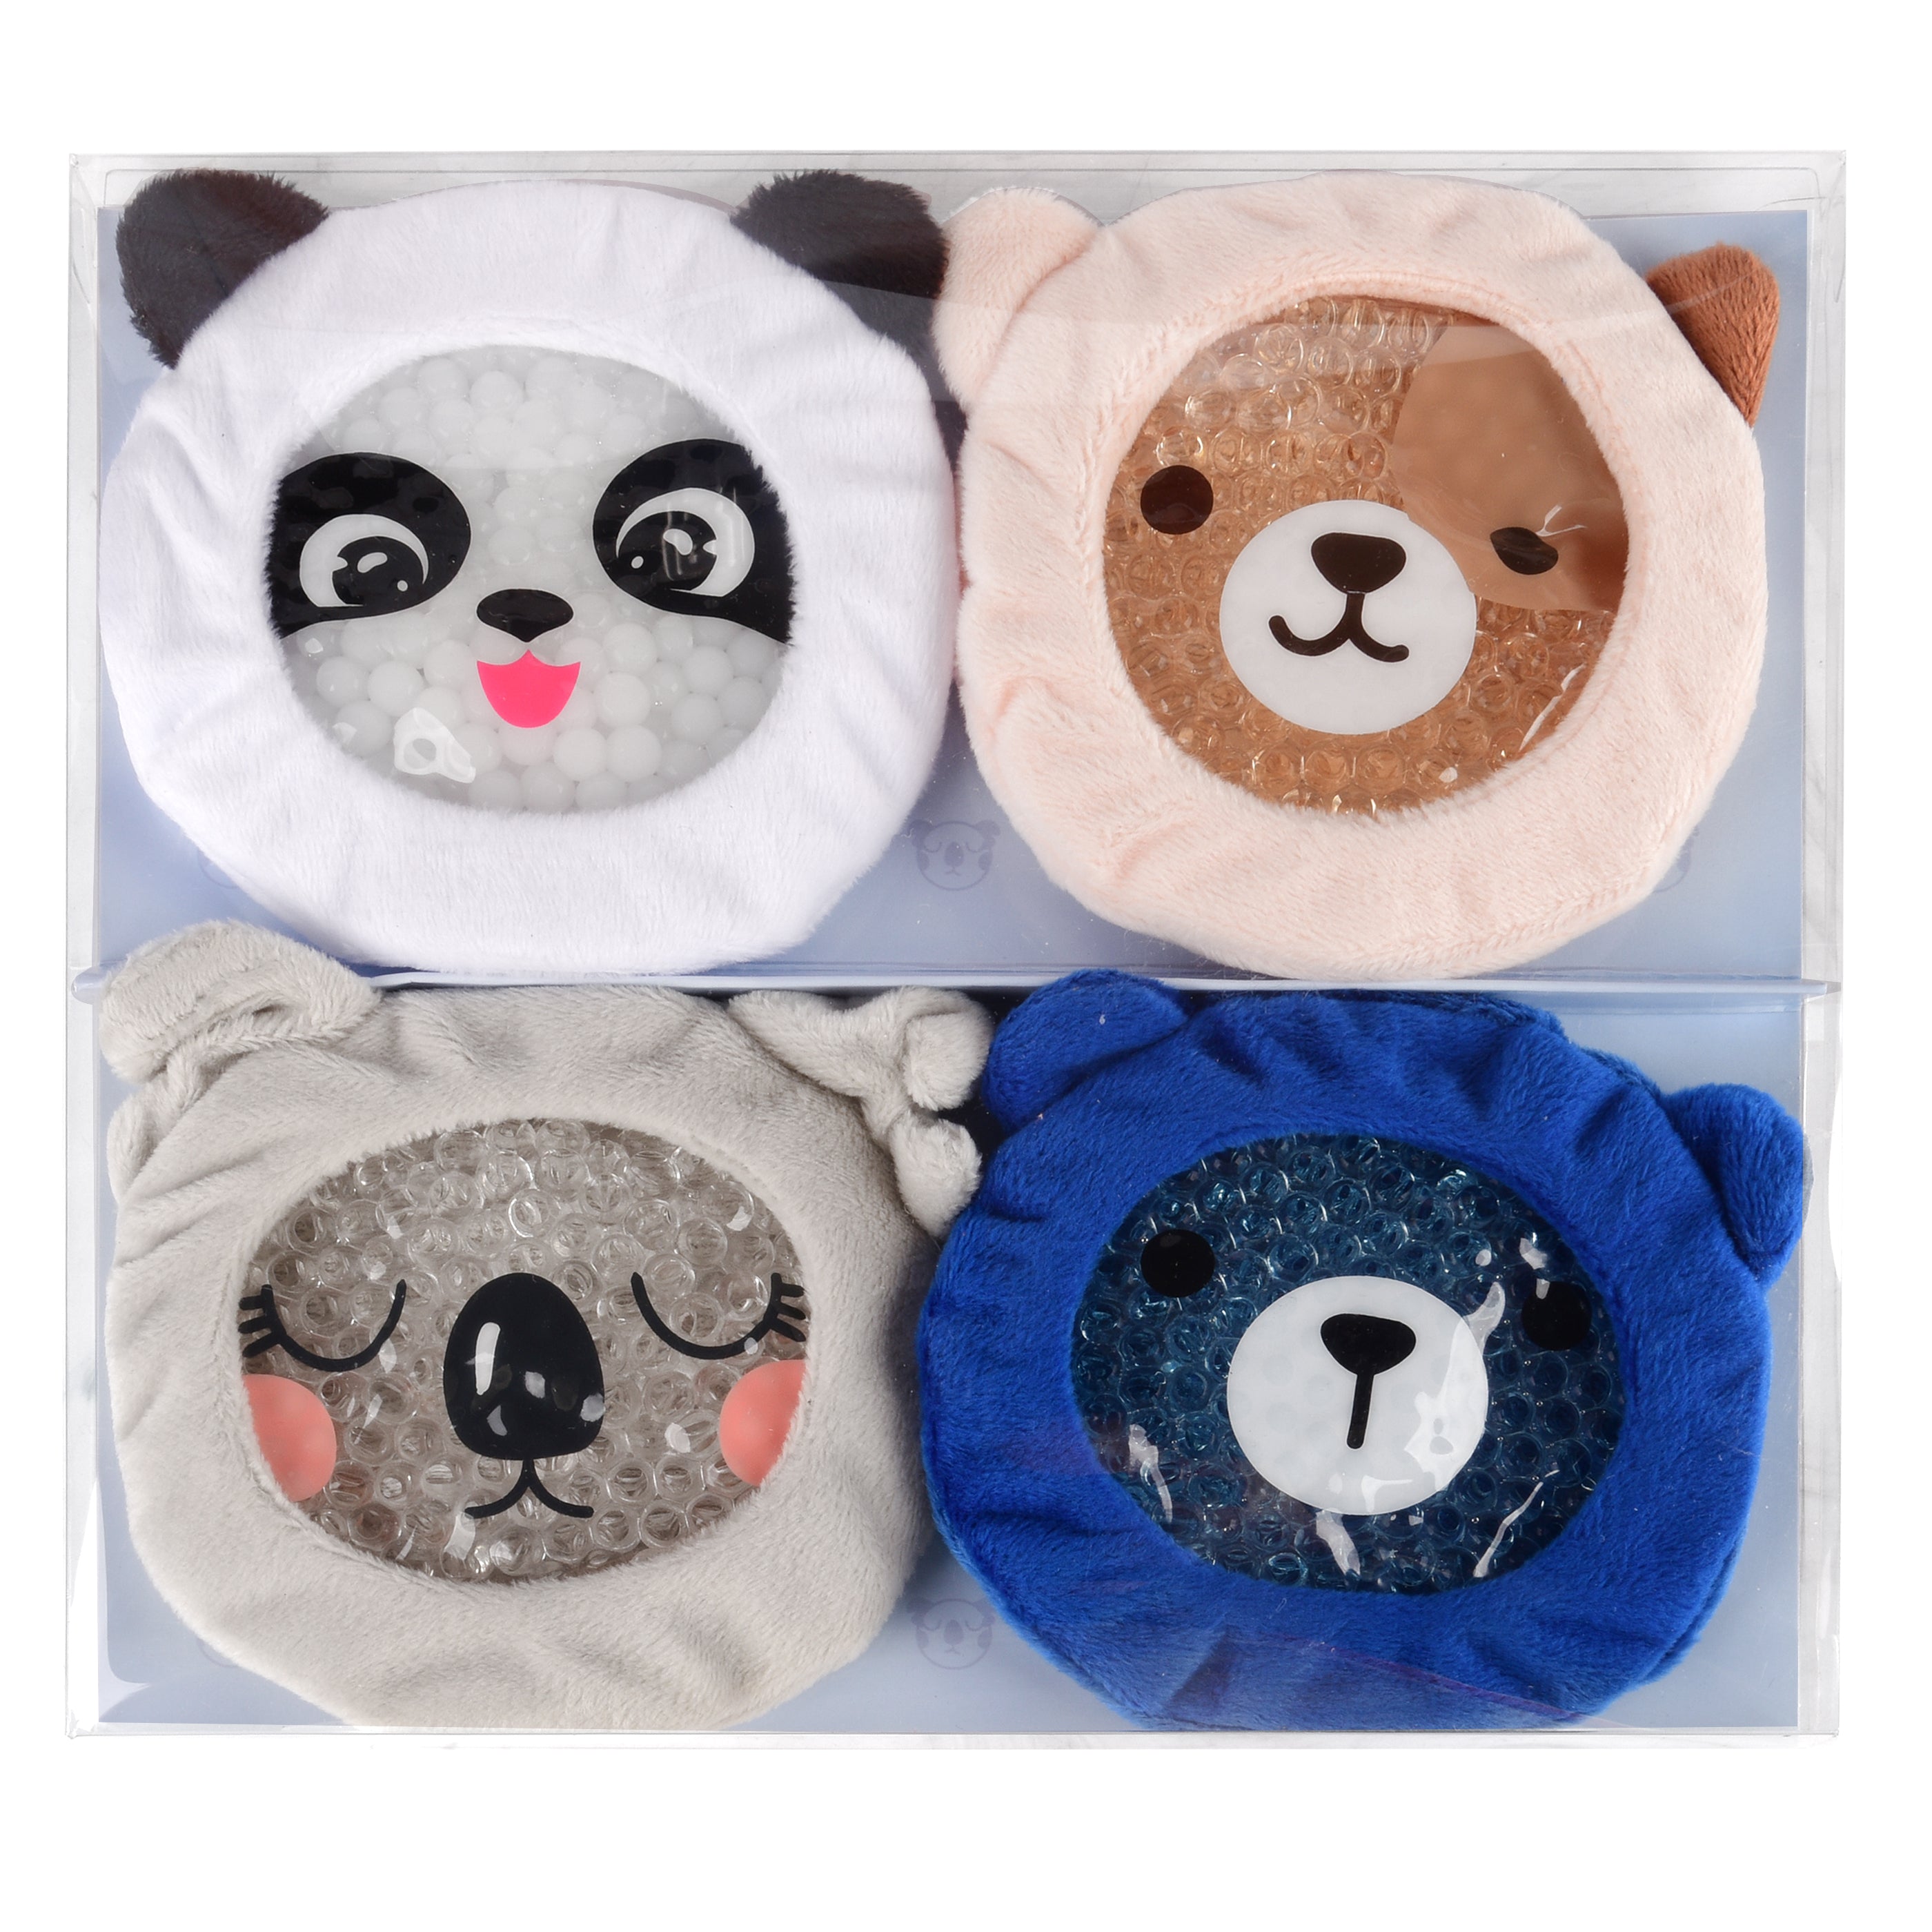 Kids Hot and Cold Fuzzy Sleeved Ice packs (Panda Set)